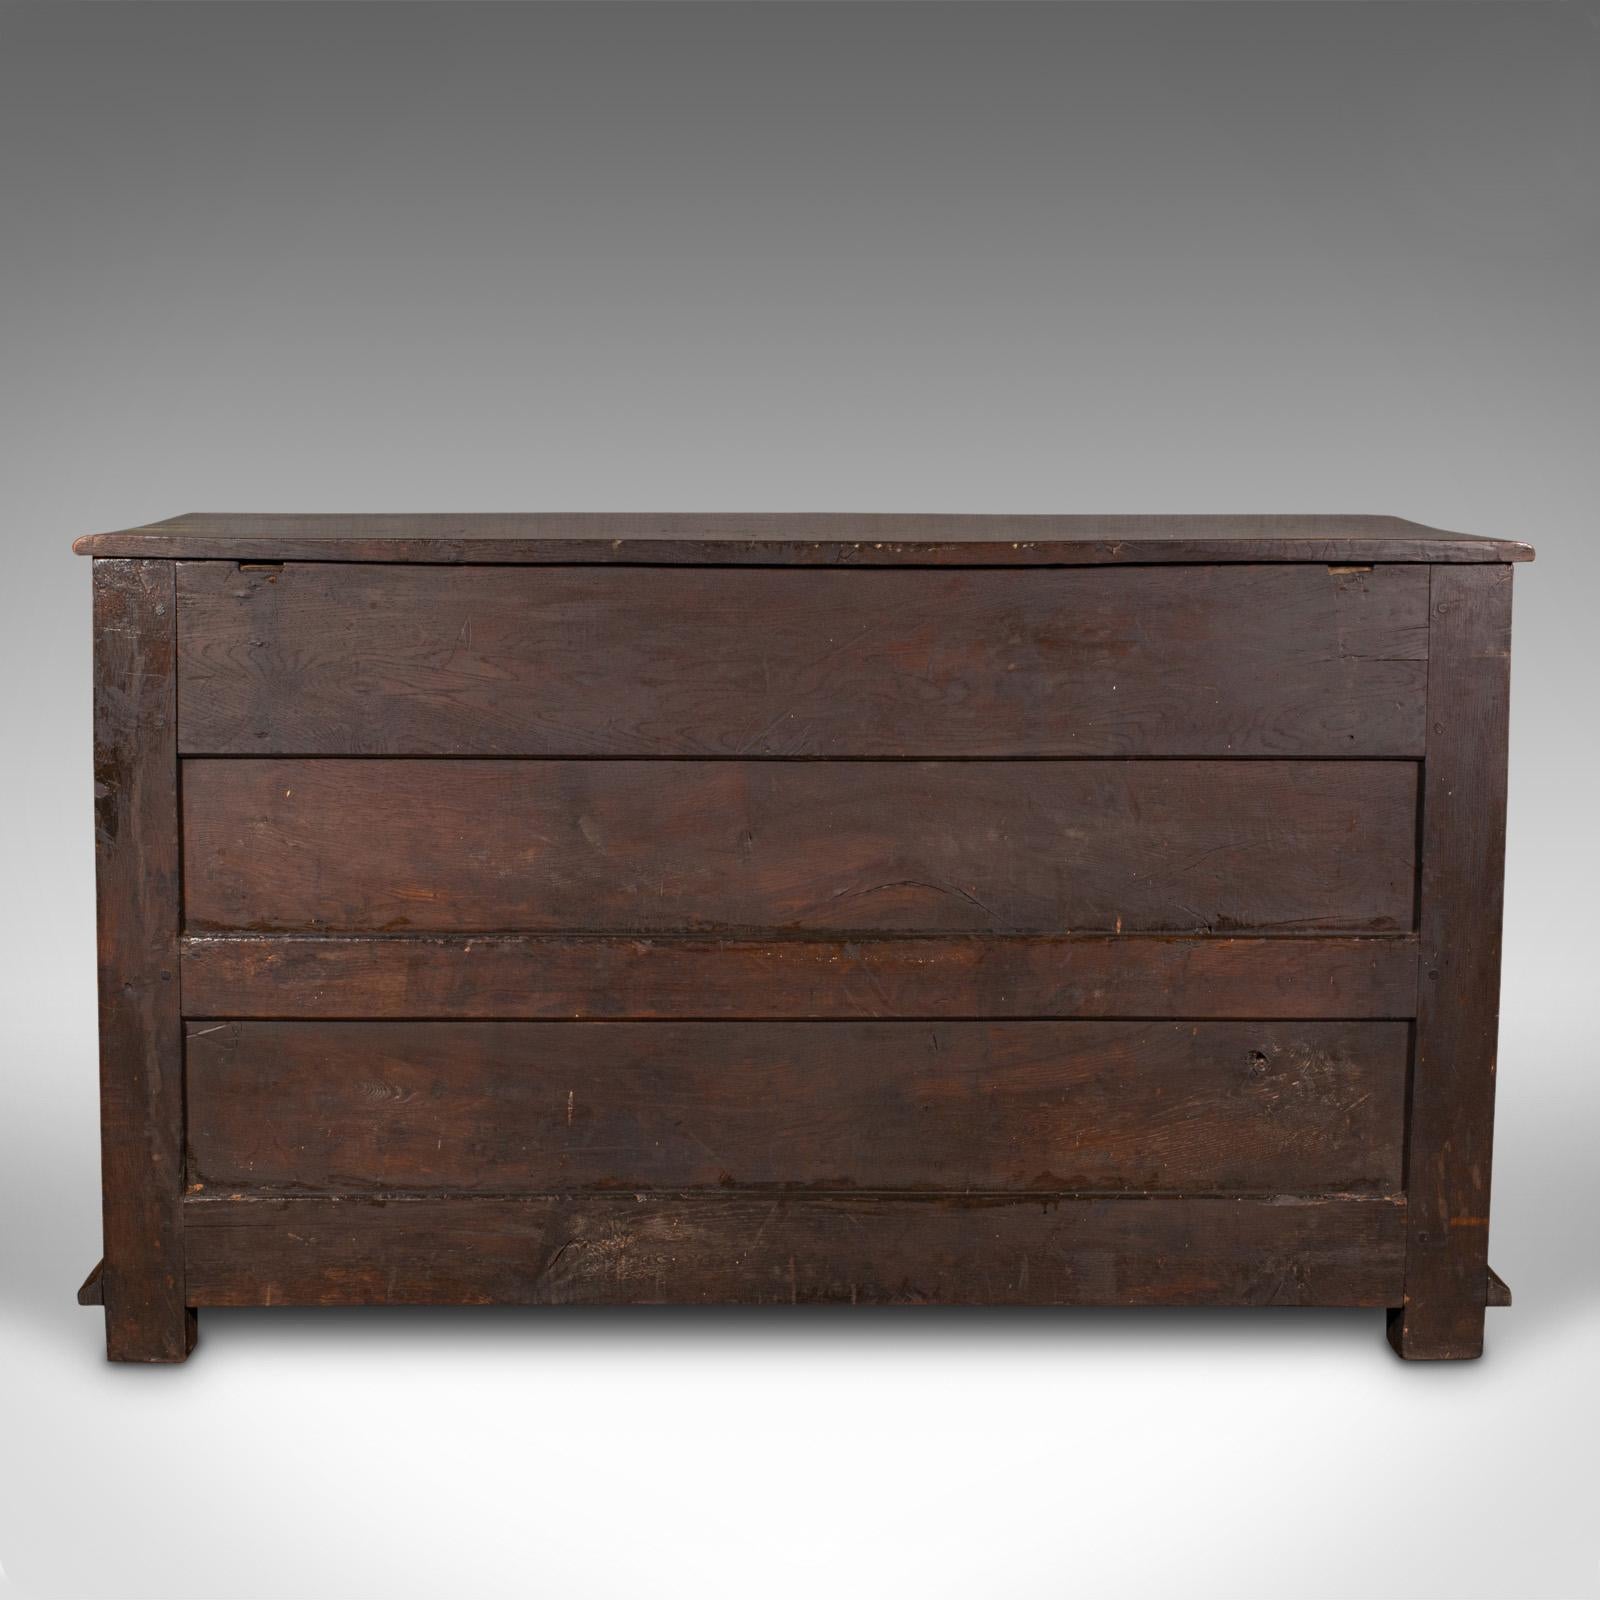 Early 19th Century Antique Country Housekeeper's Cabinet, English Oak, Dresser Base, Georgian, 1800 For Sale